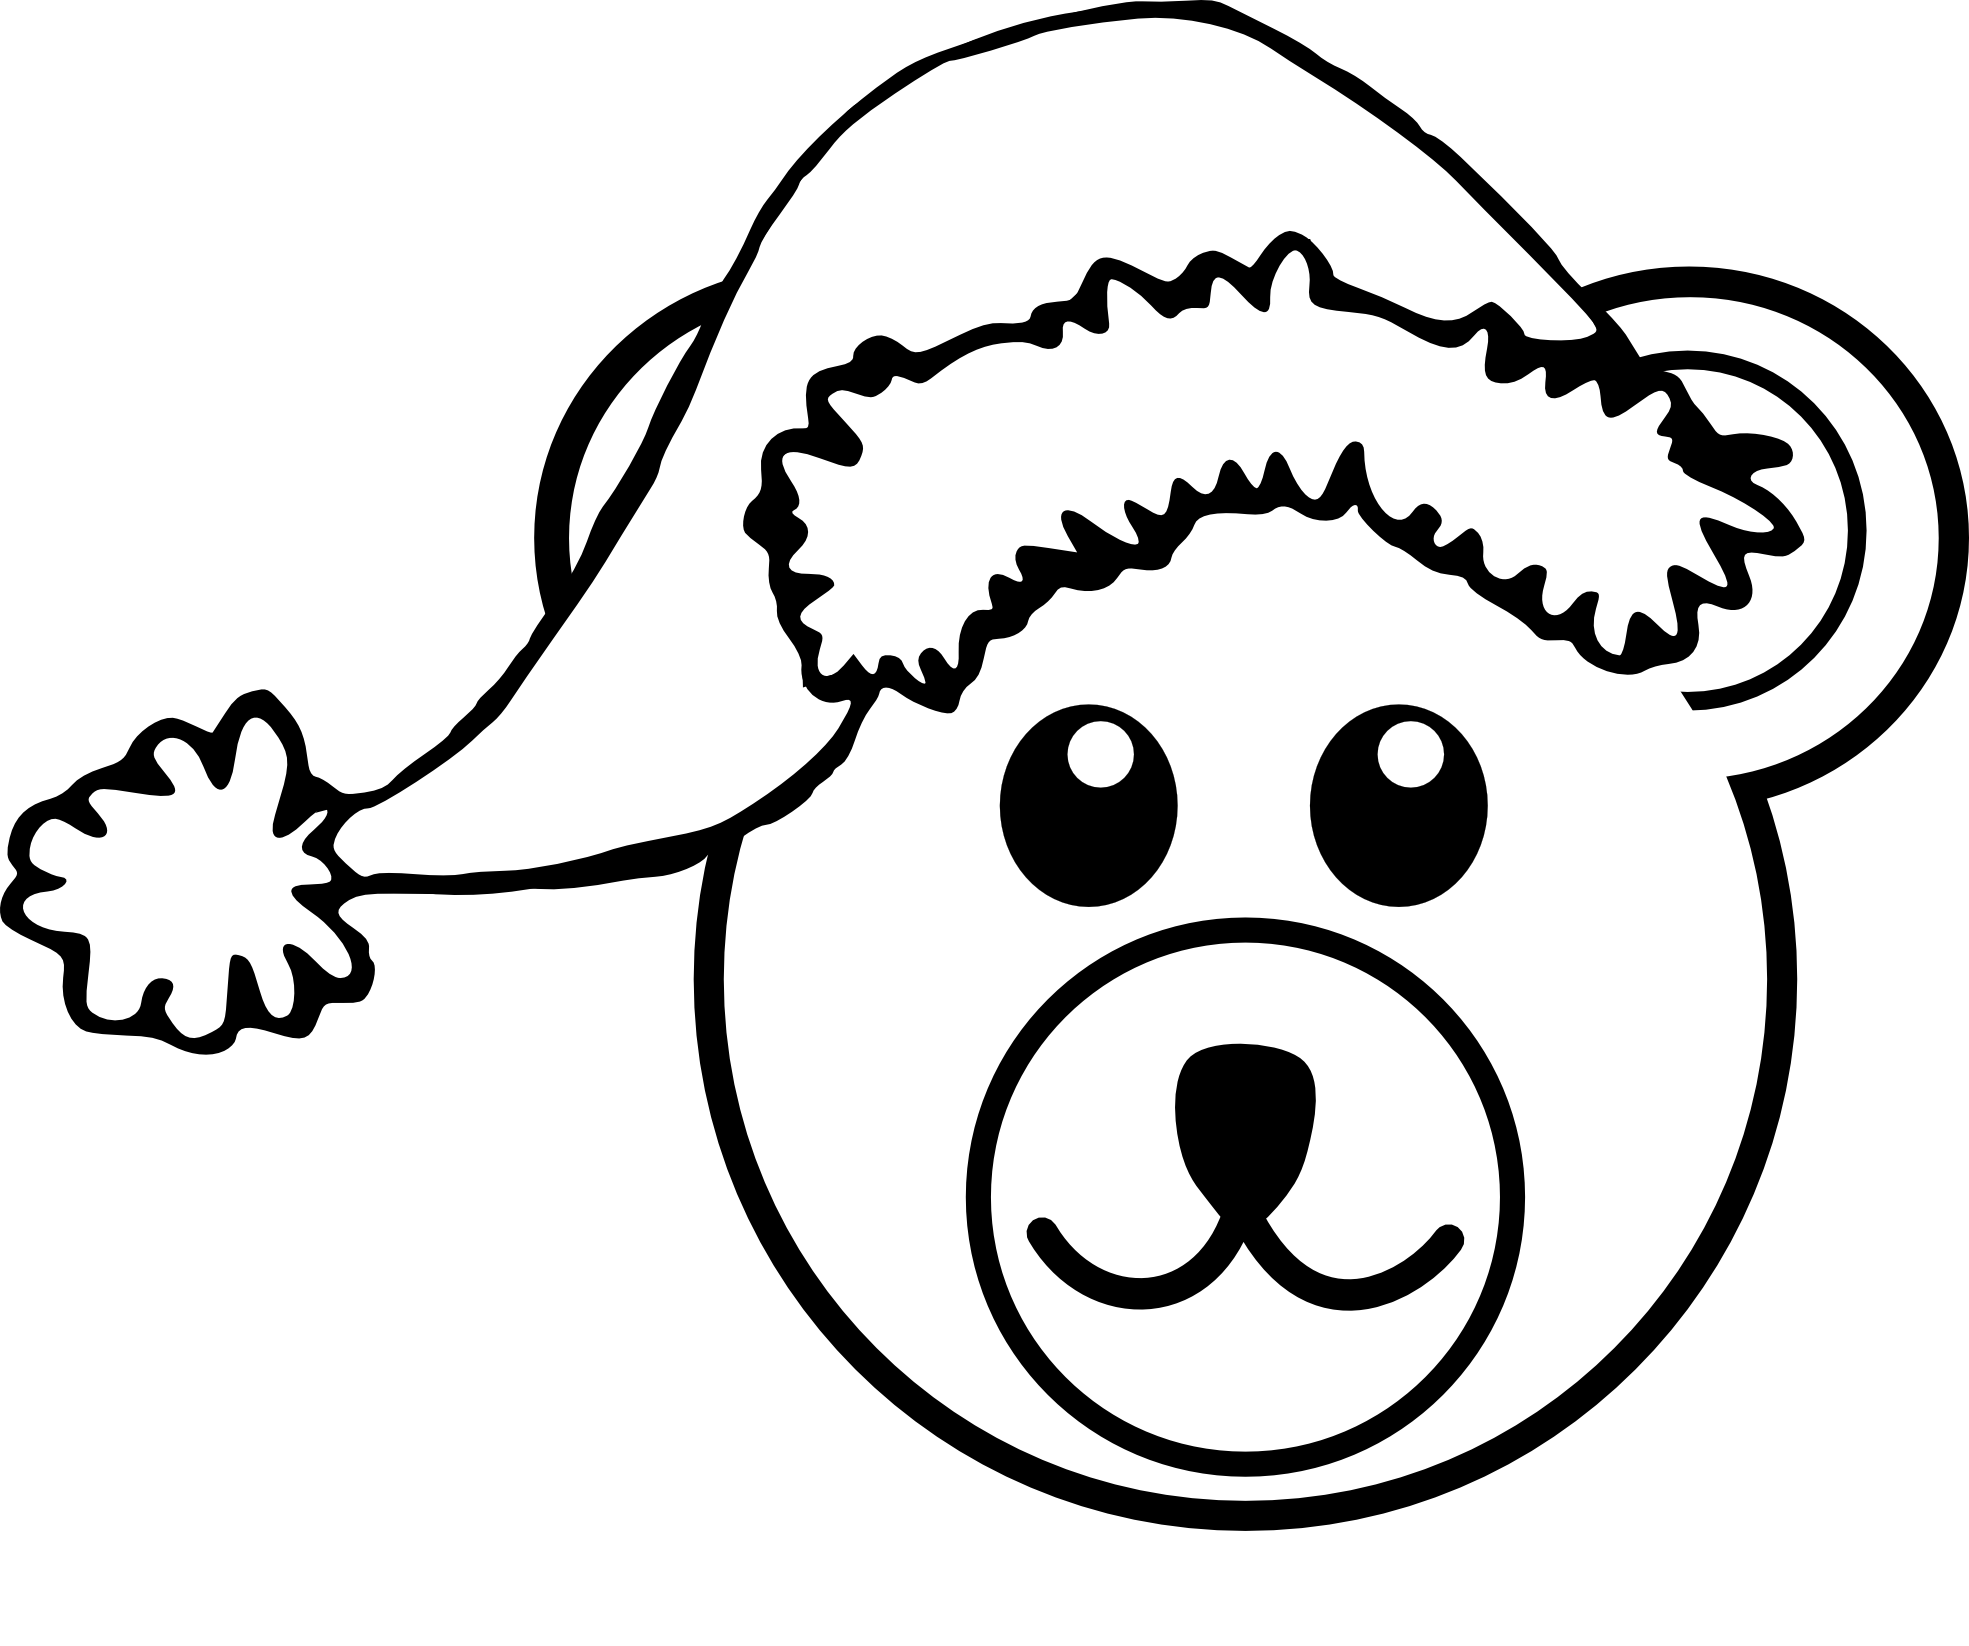 Teddy bear  black and white brown bear black and white clipart